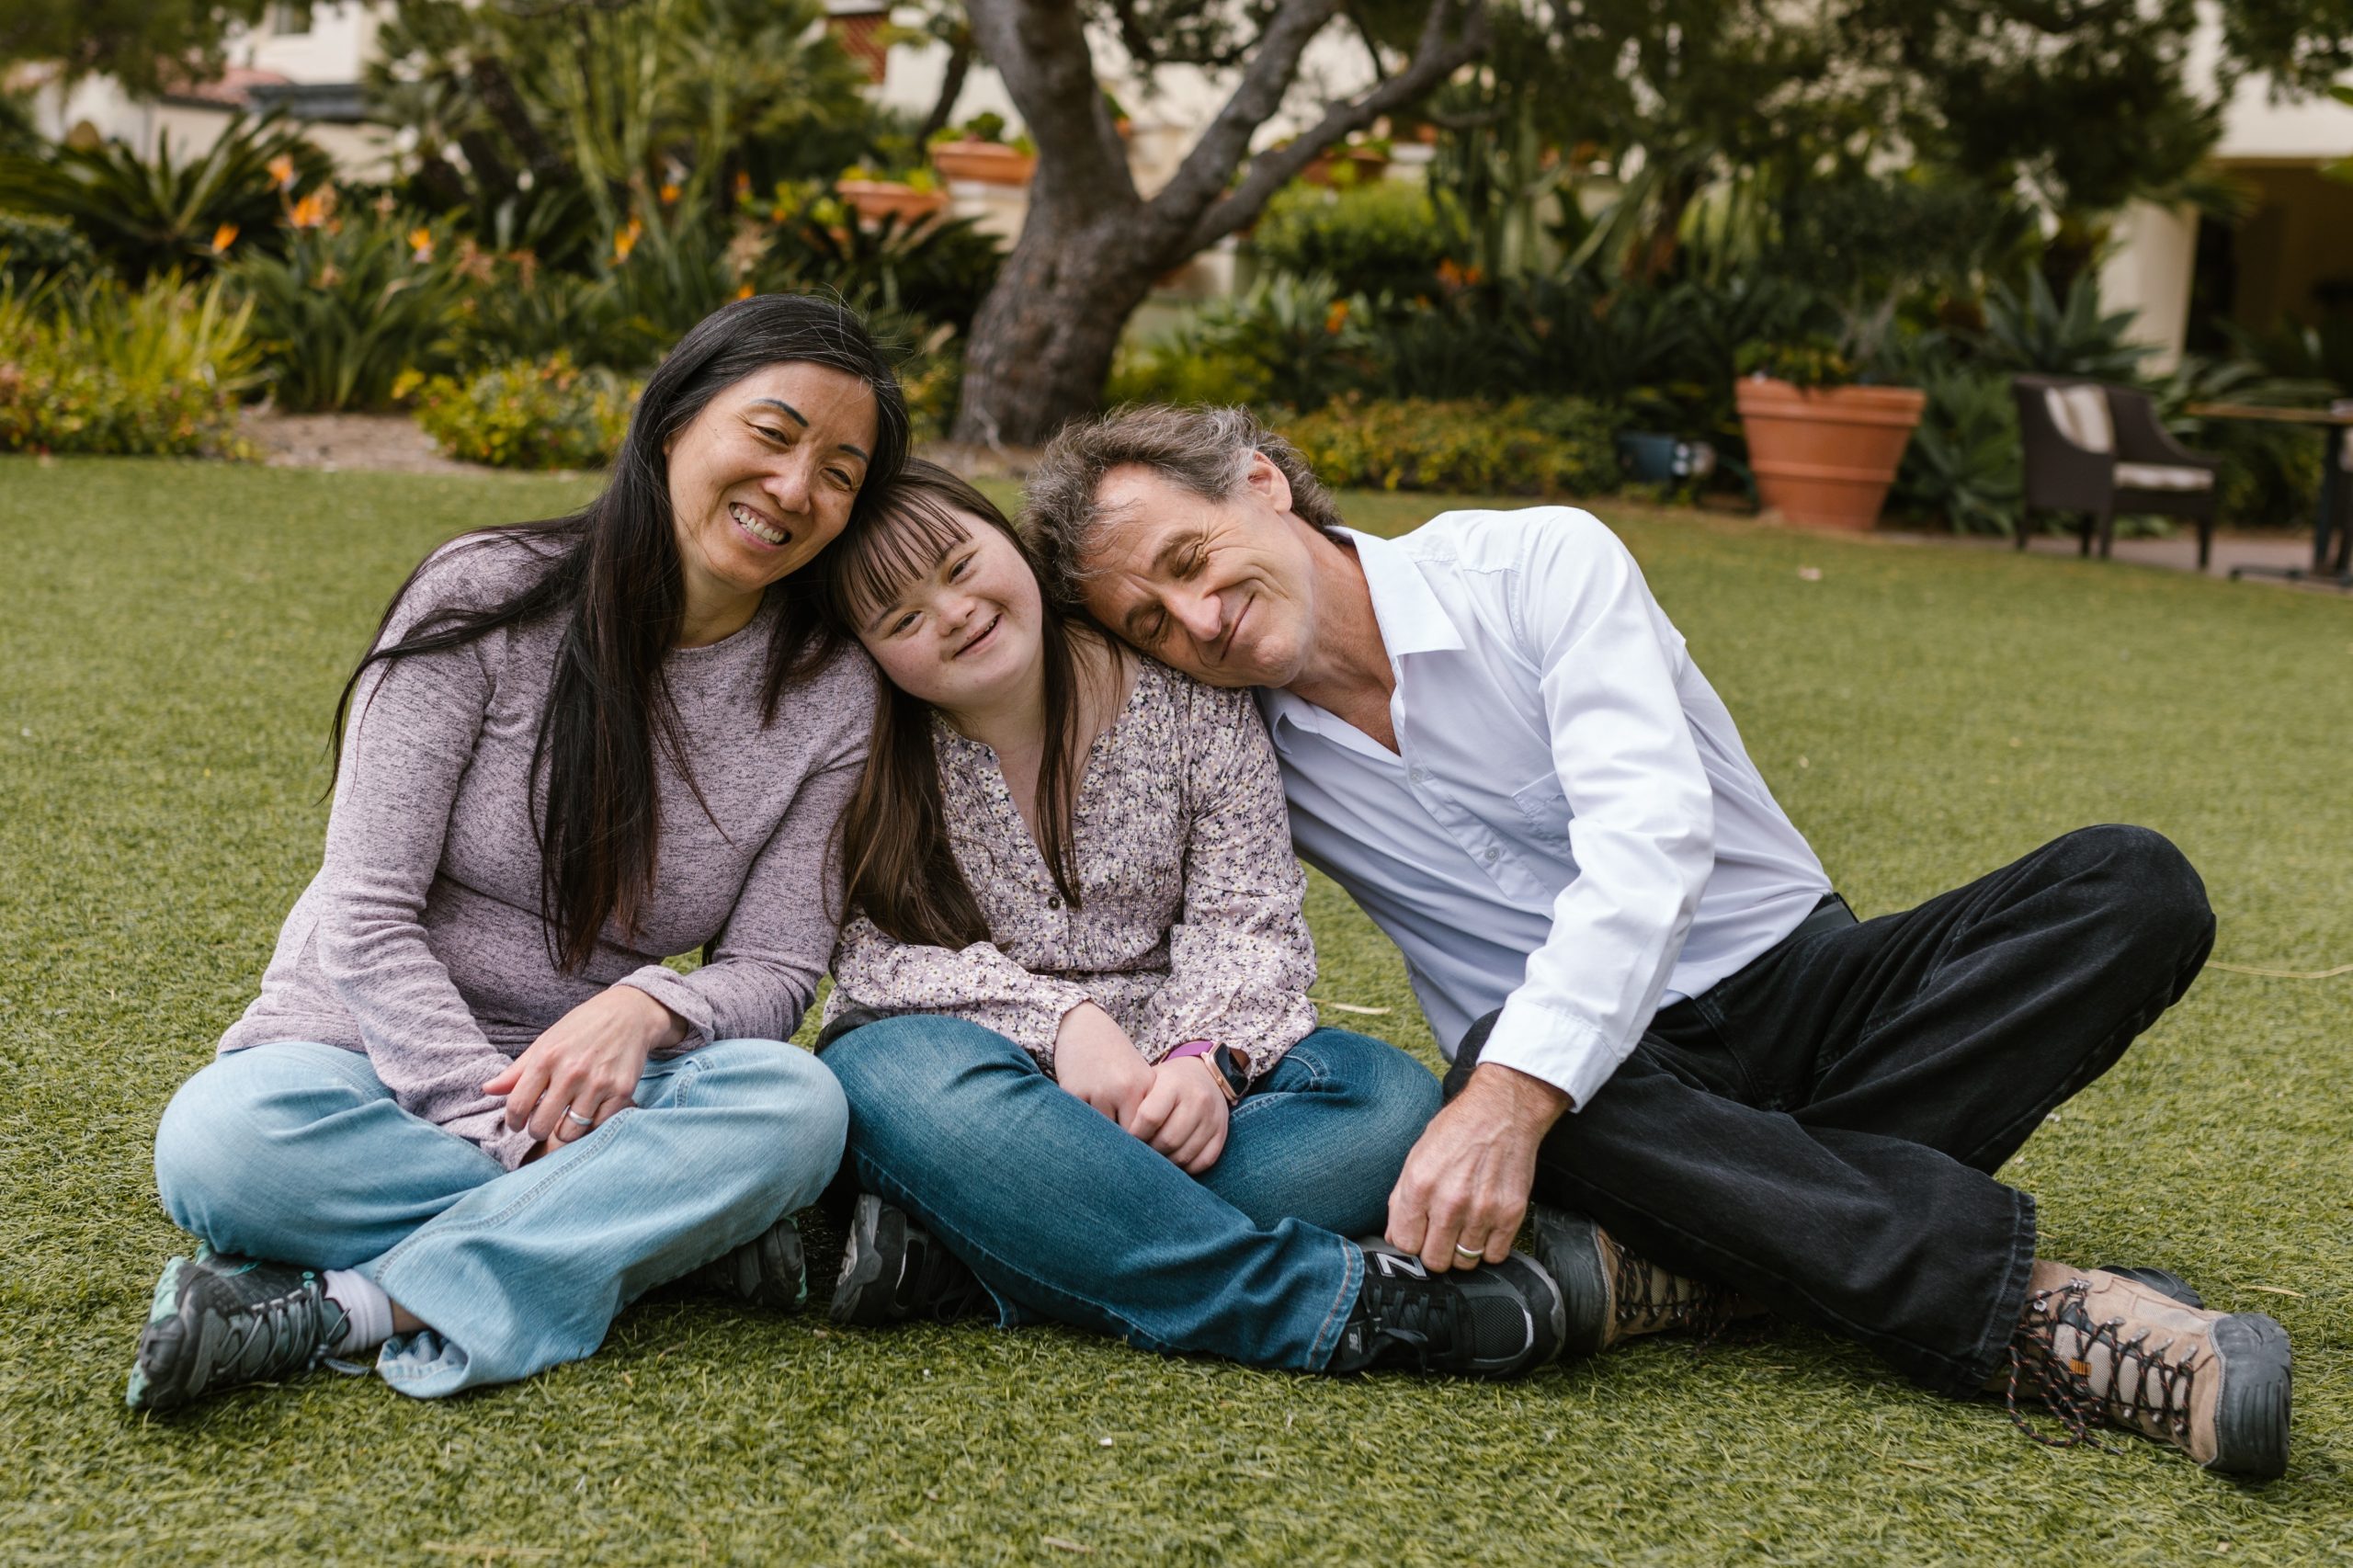 An image of parents and child with Down syndrome smiling and sitting on grass